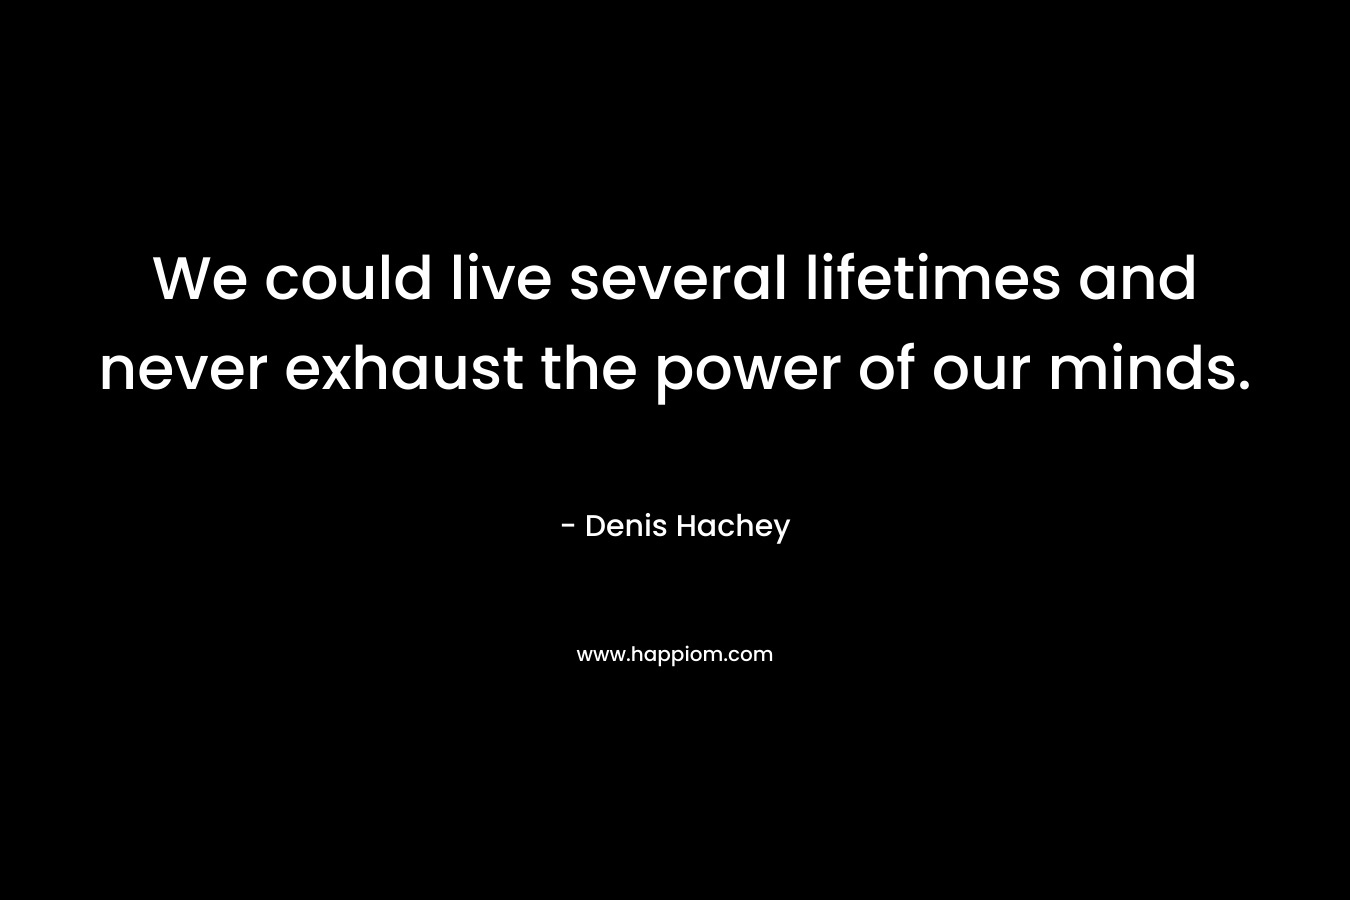 We could live several lifetimes and never exhaust the power of our minds.